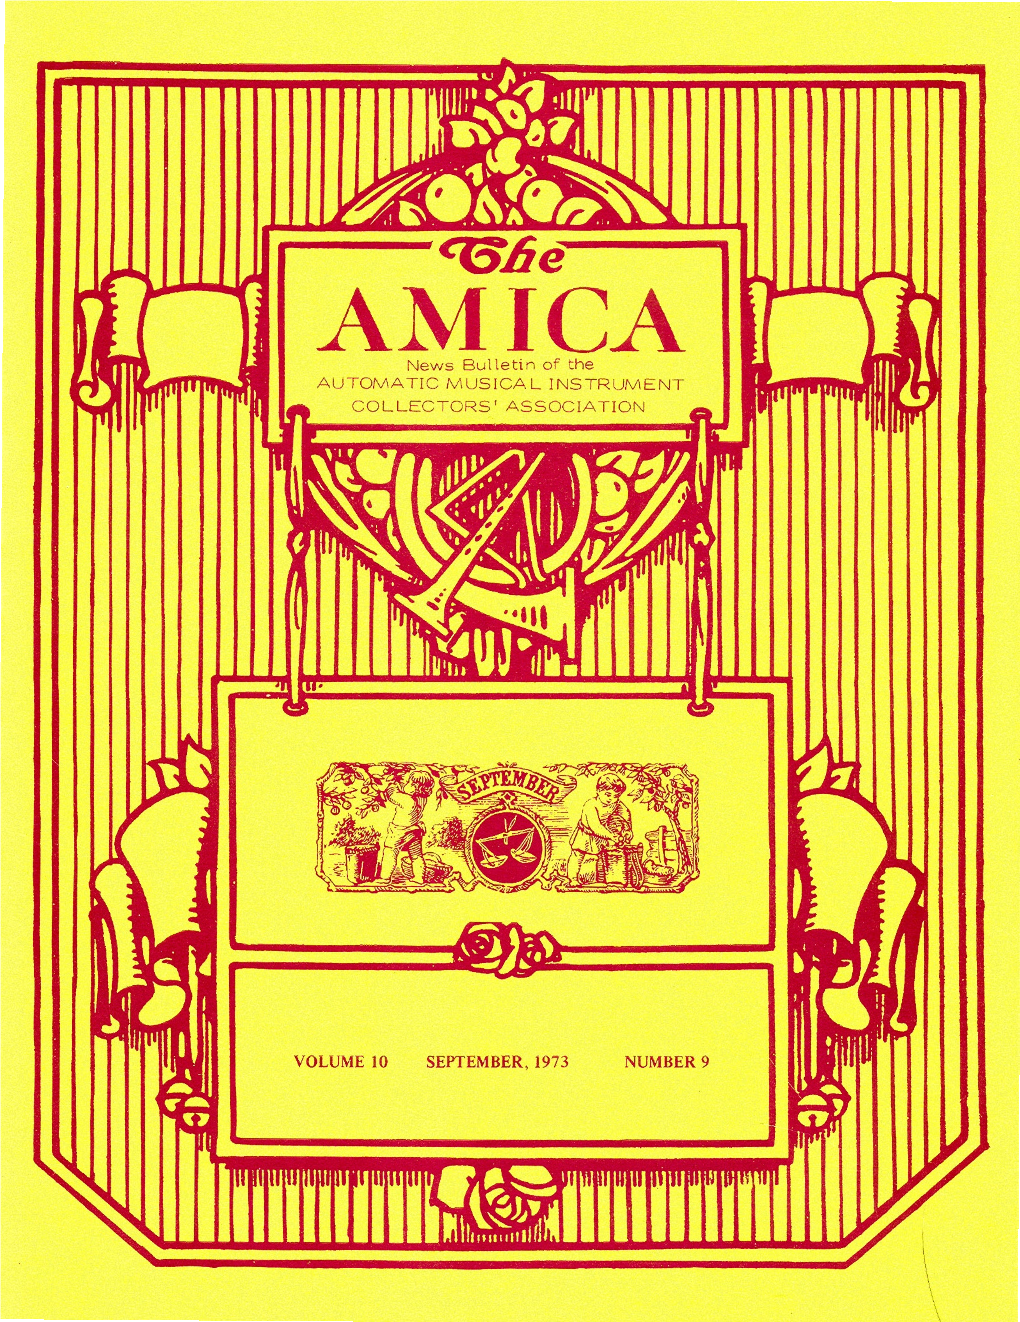 Cf5.6E AMICA News Bulletin of the AUTOMATIC MUSICAL INSTRUMENT COLLECTORS' ASSOCIATION